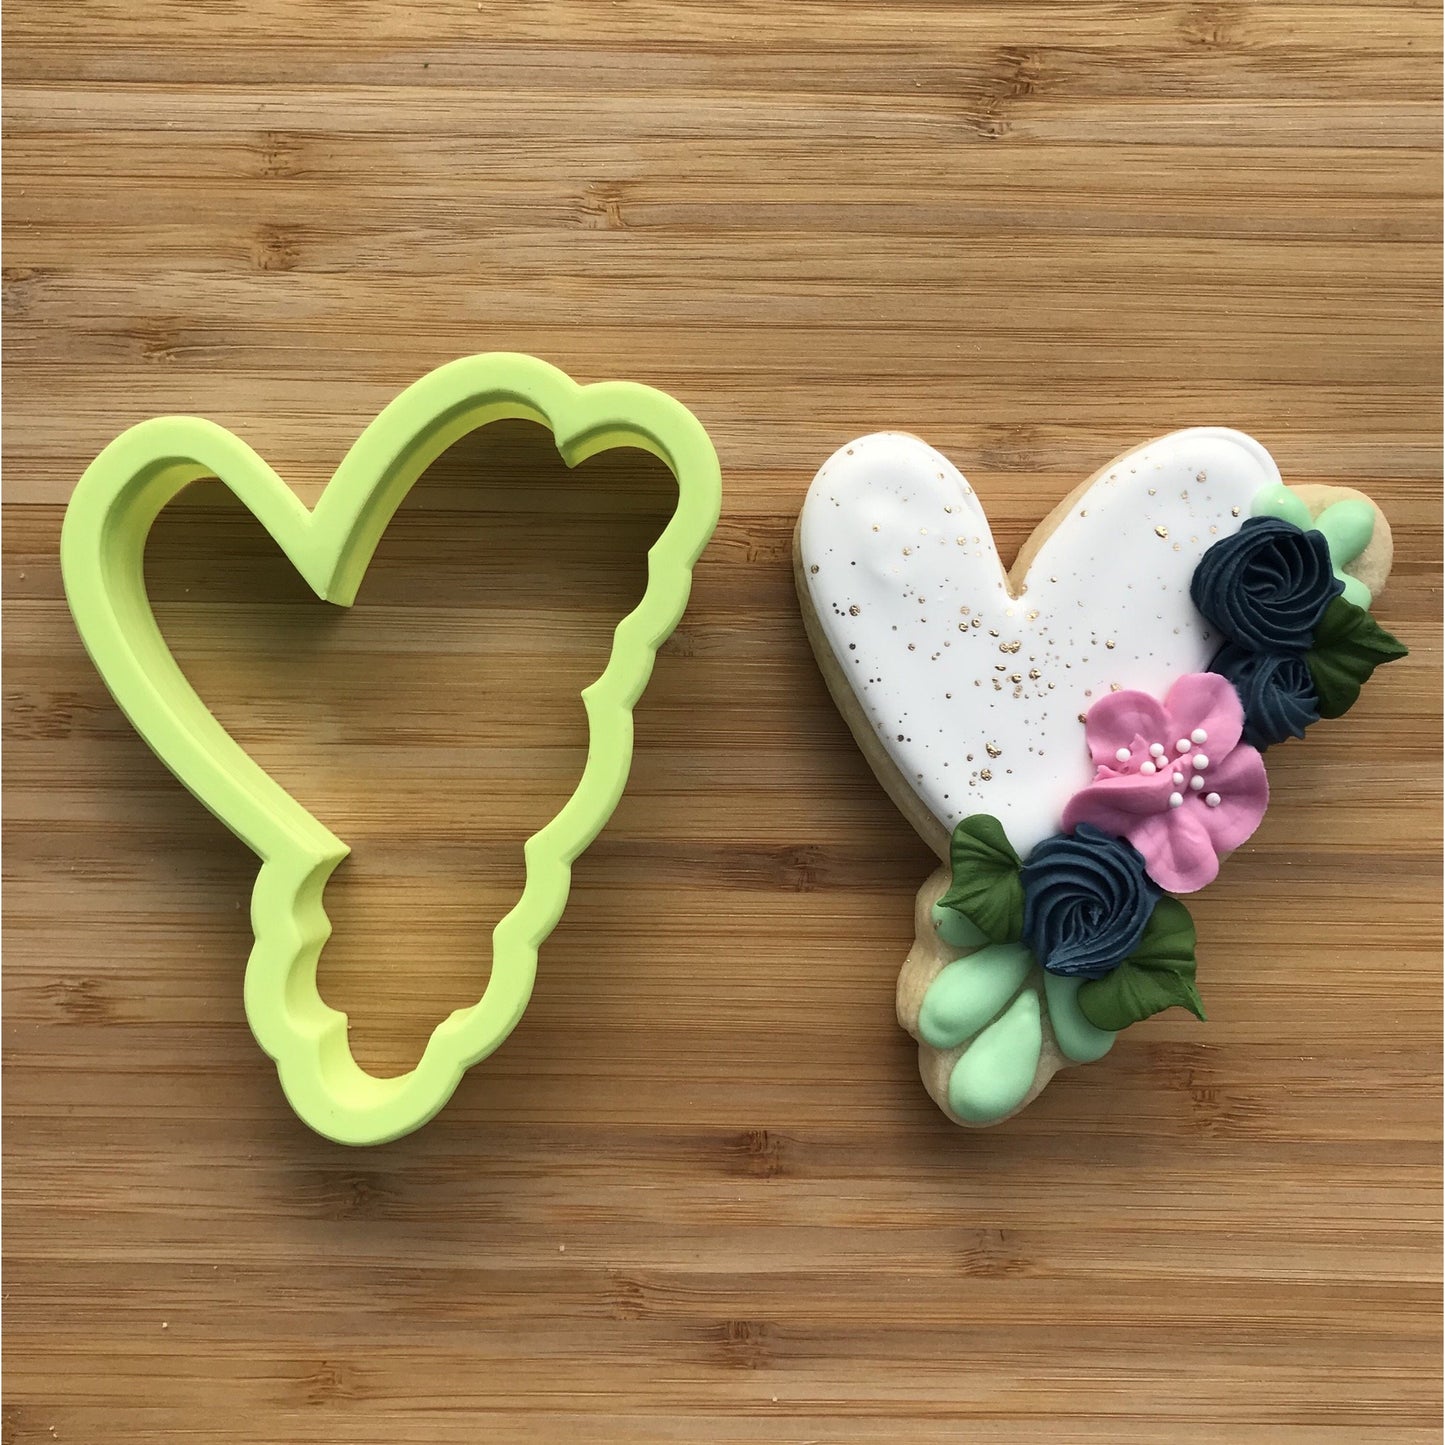 Floral Heart 2 Cookie Cutter